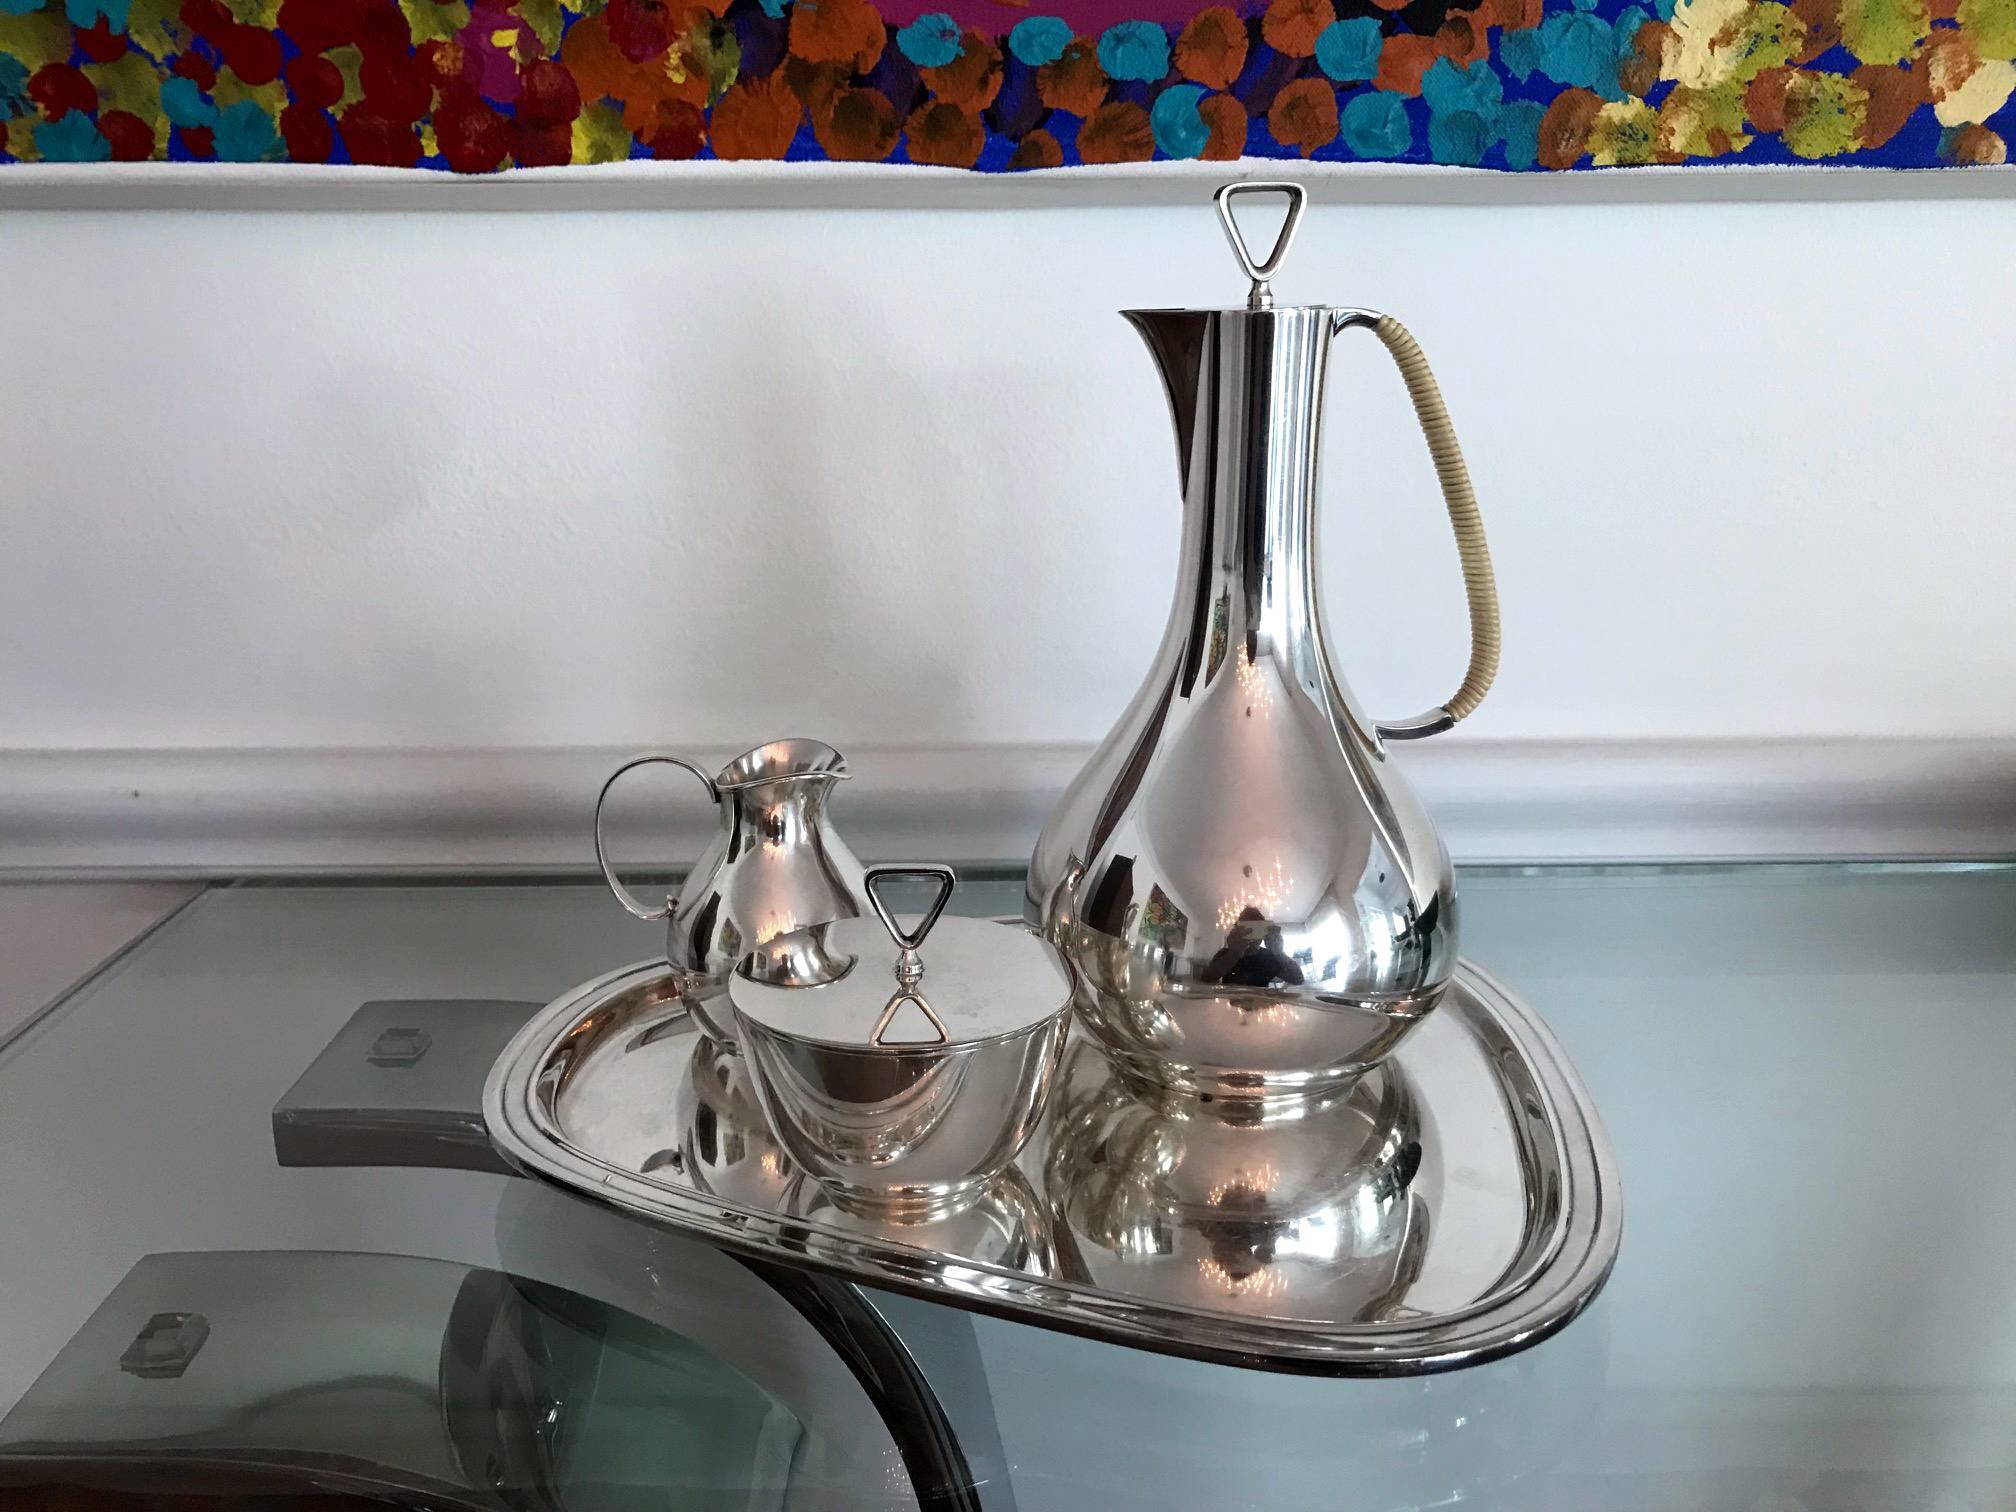 A Mid-Century Modernist coffee or tea service in sterling silver designed by Sigvard Bernadotte for Georg Jensen, circa 1950s. The service consists of four pieces, a coffee pot, a creamer, a sugar and an organically shaped tray, all marked